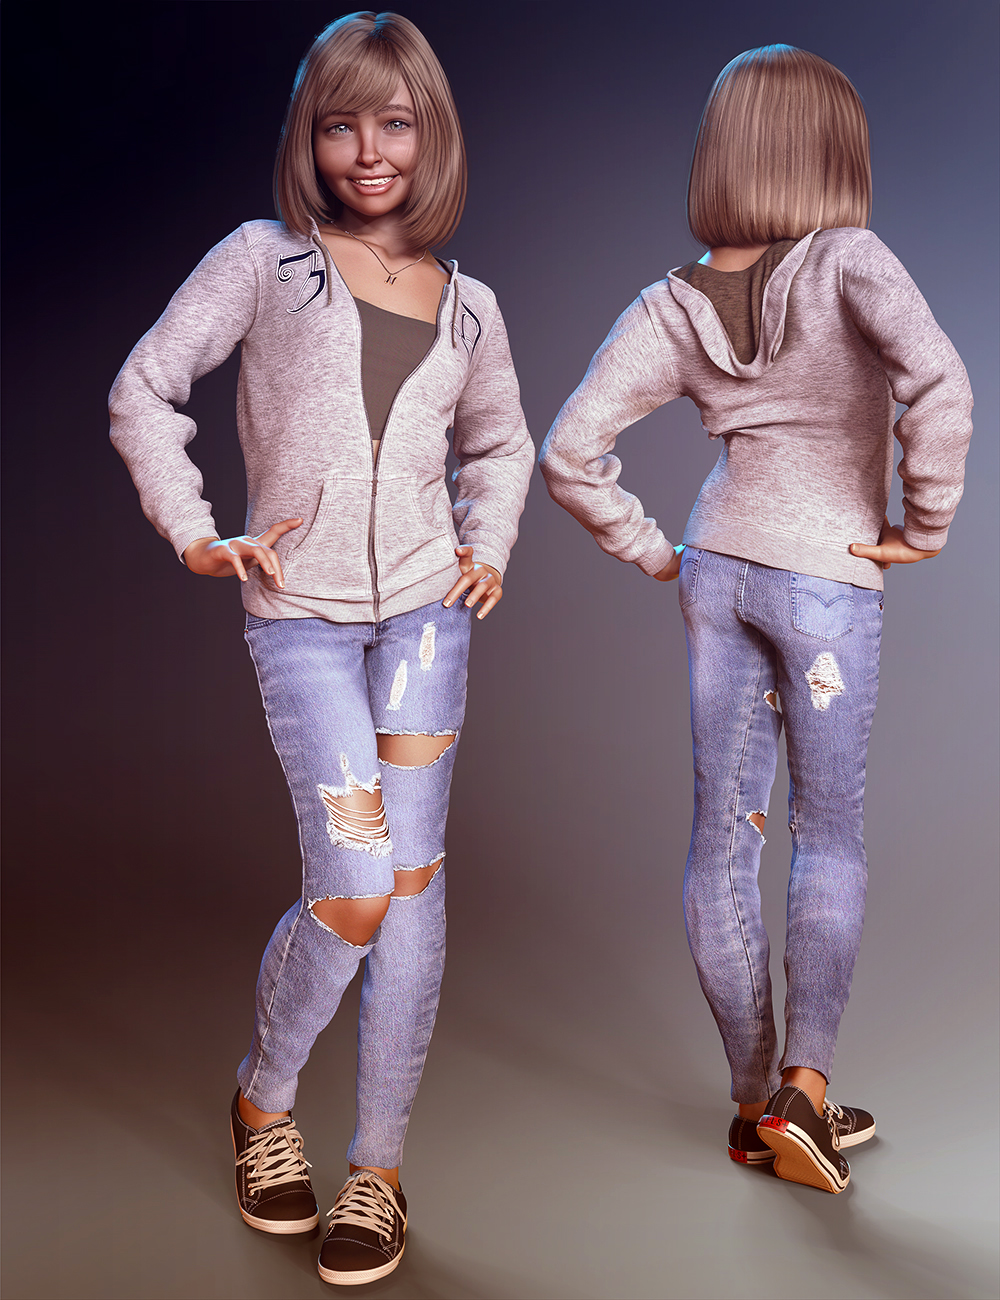 Novara dForce Clothing and Accessories for Genesis 8 Females by: 3D Universe, 3D Models by Daz 3D